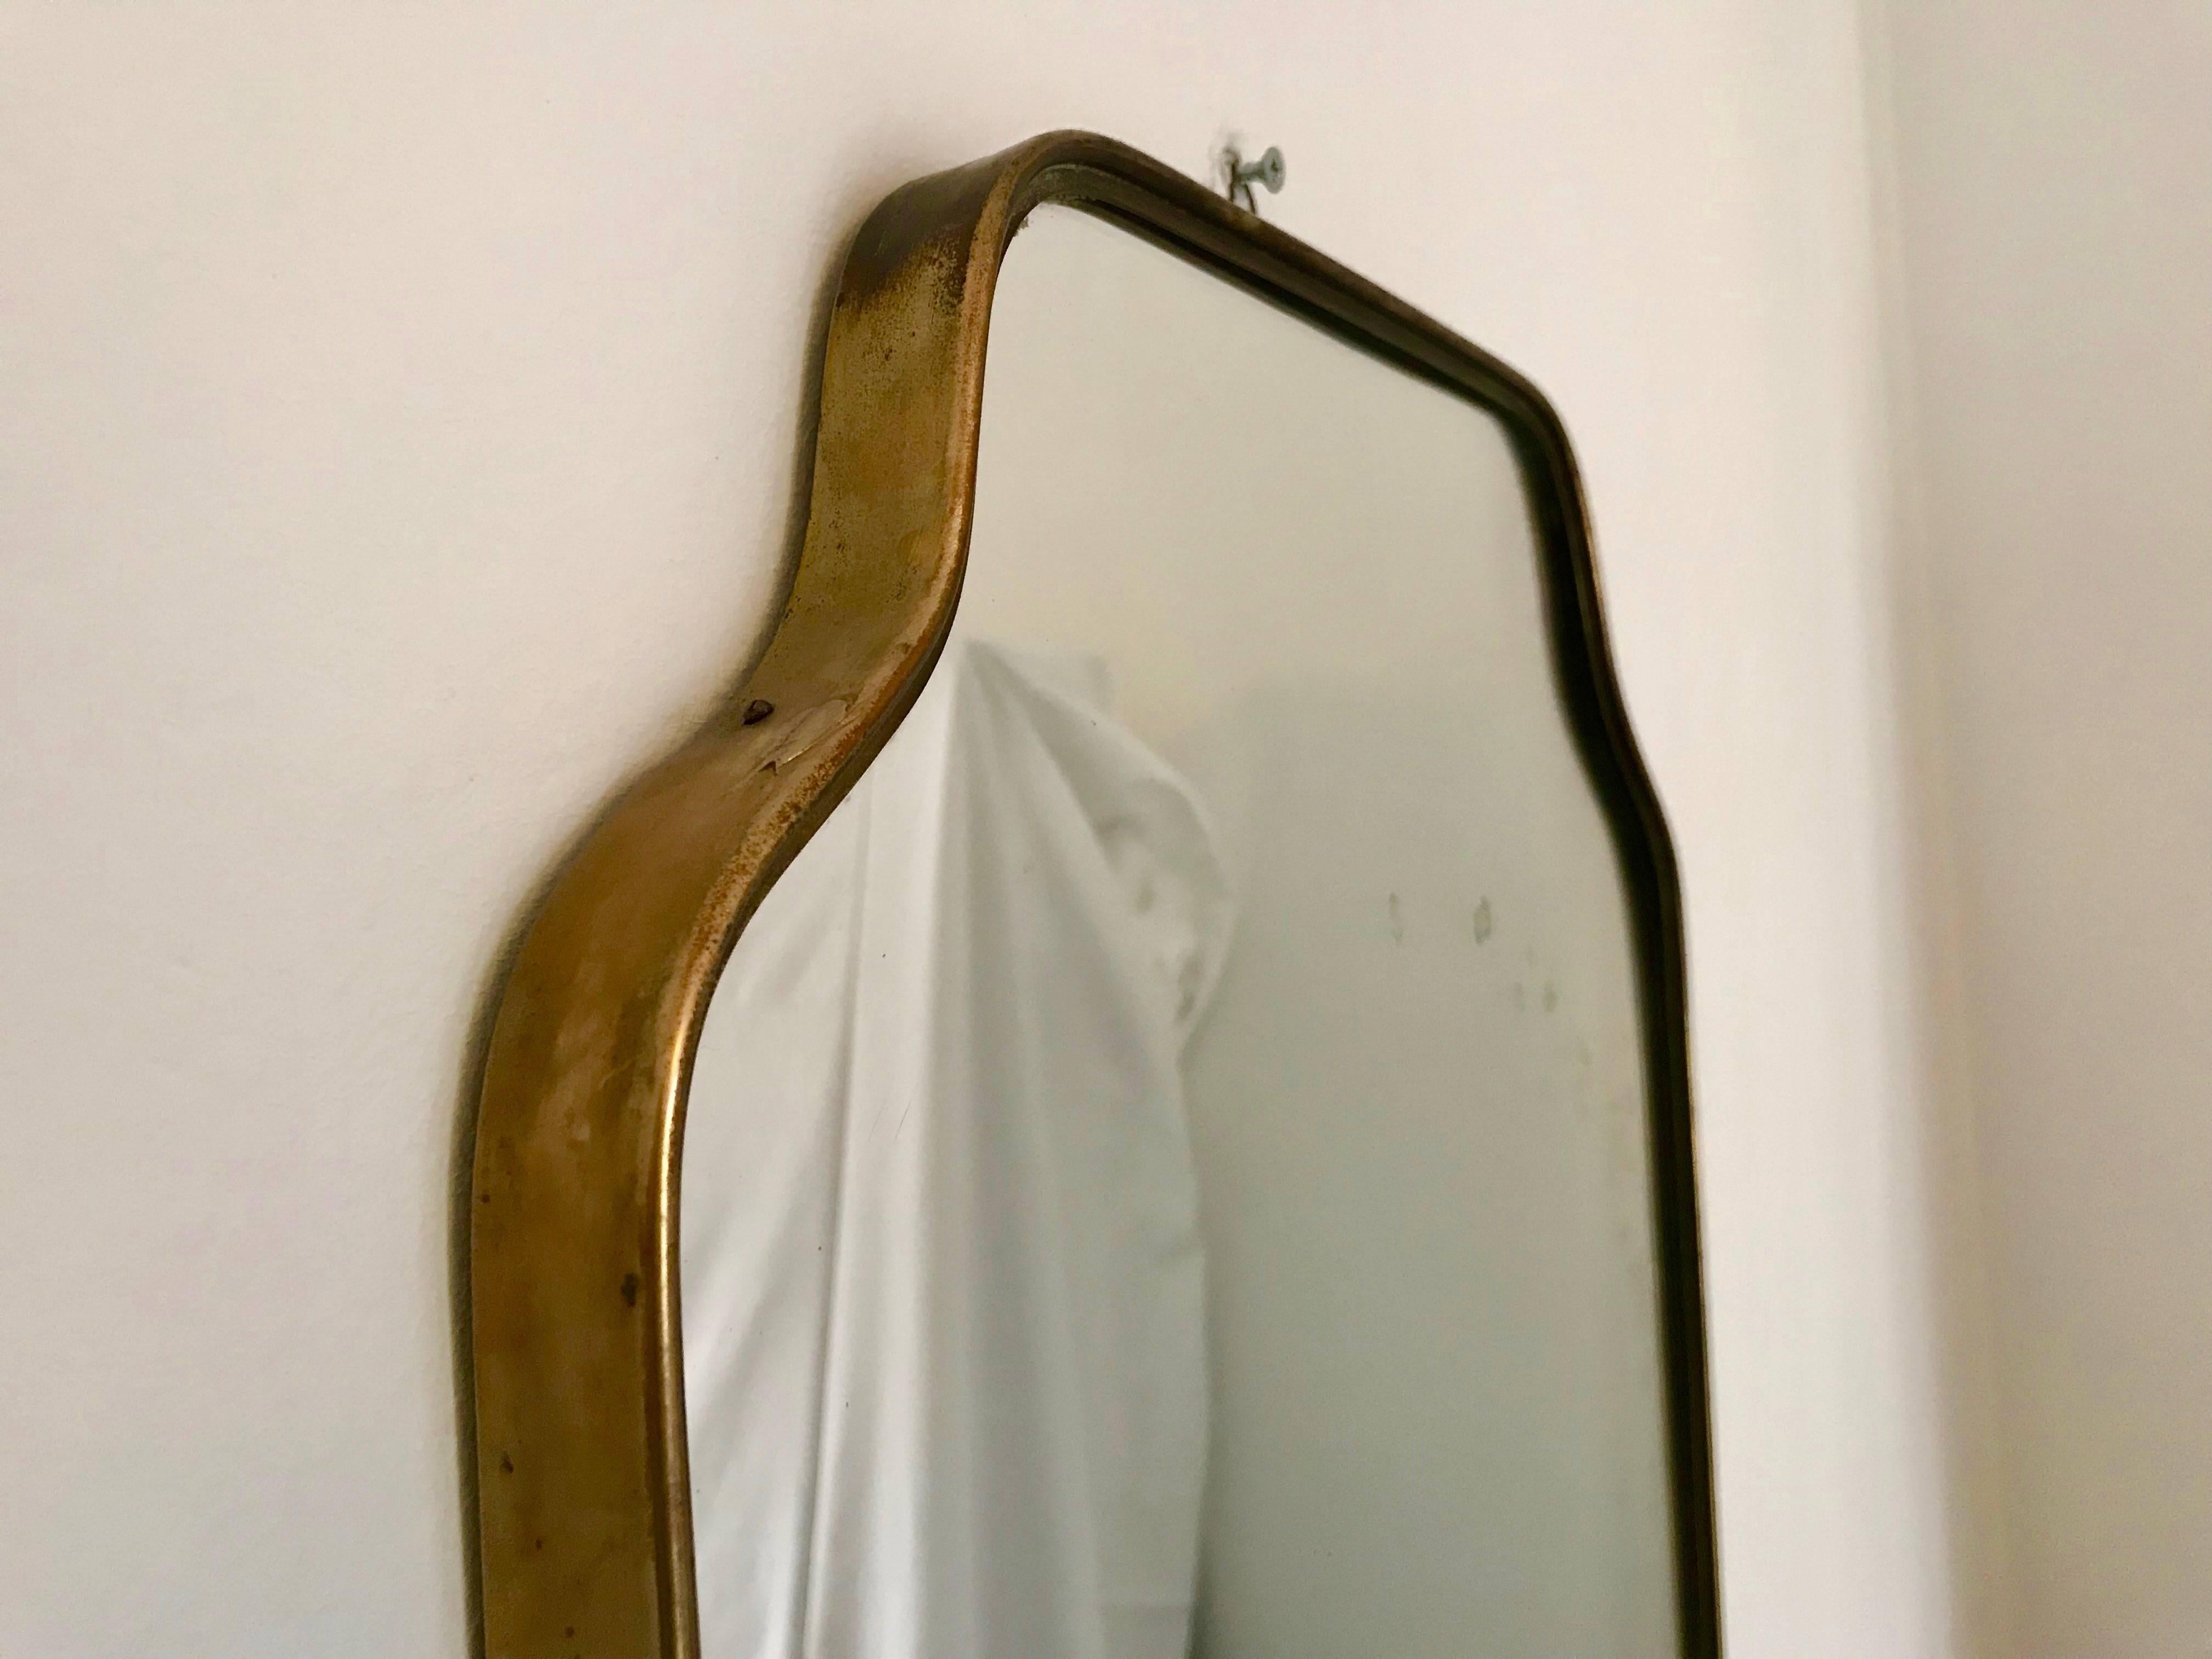 Authentic Italian Brass Mirror from the Mid Century period, original condition. The mirror presents some signs which is completely normal due to age and a direct testimony of its intact authenticity. Approx size 69h x 41 cm